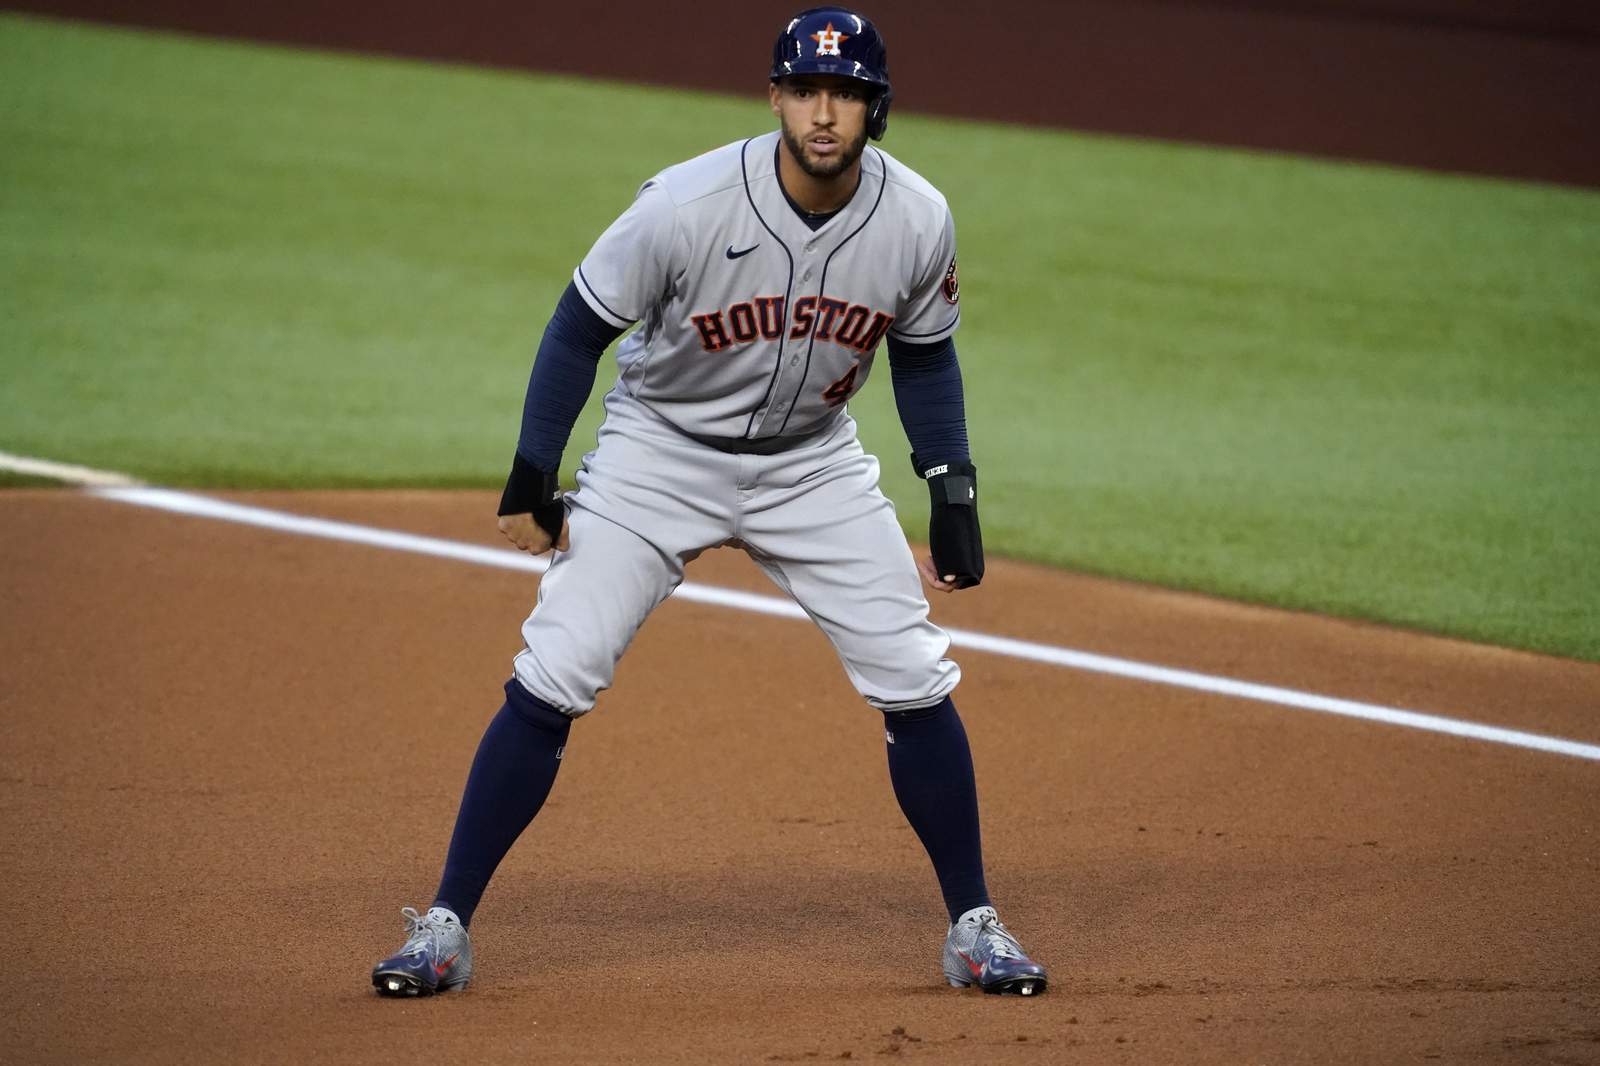 New Jays OF Springer sees echoes of Astros in Toronto's core